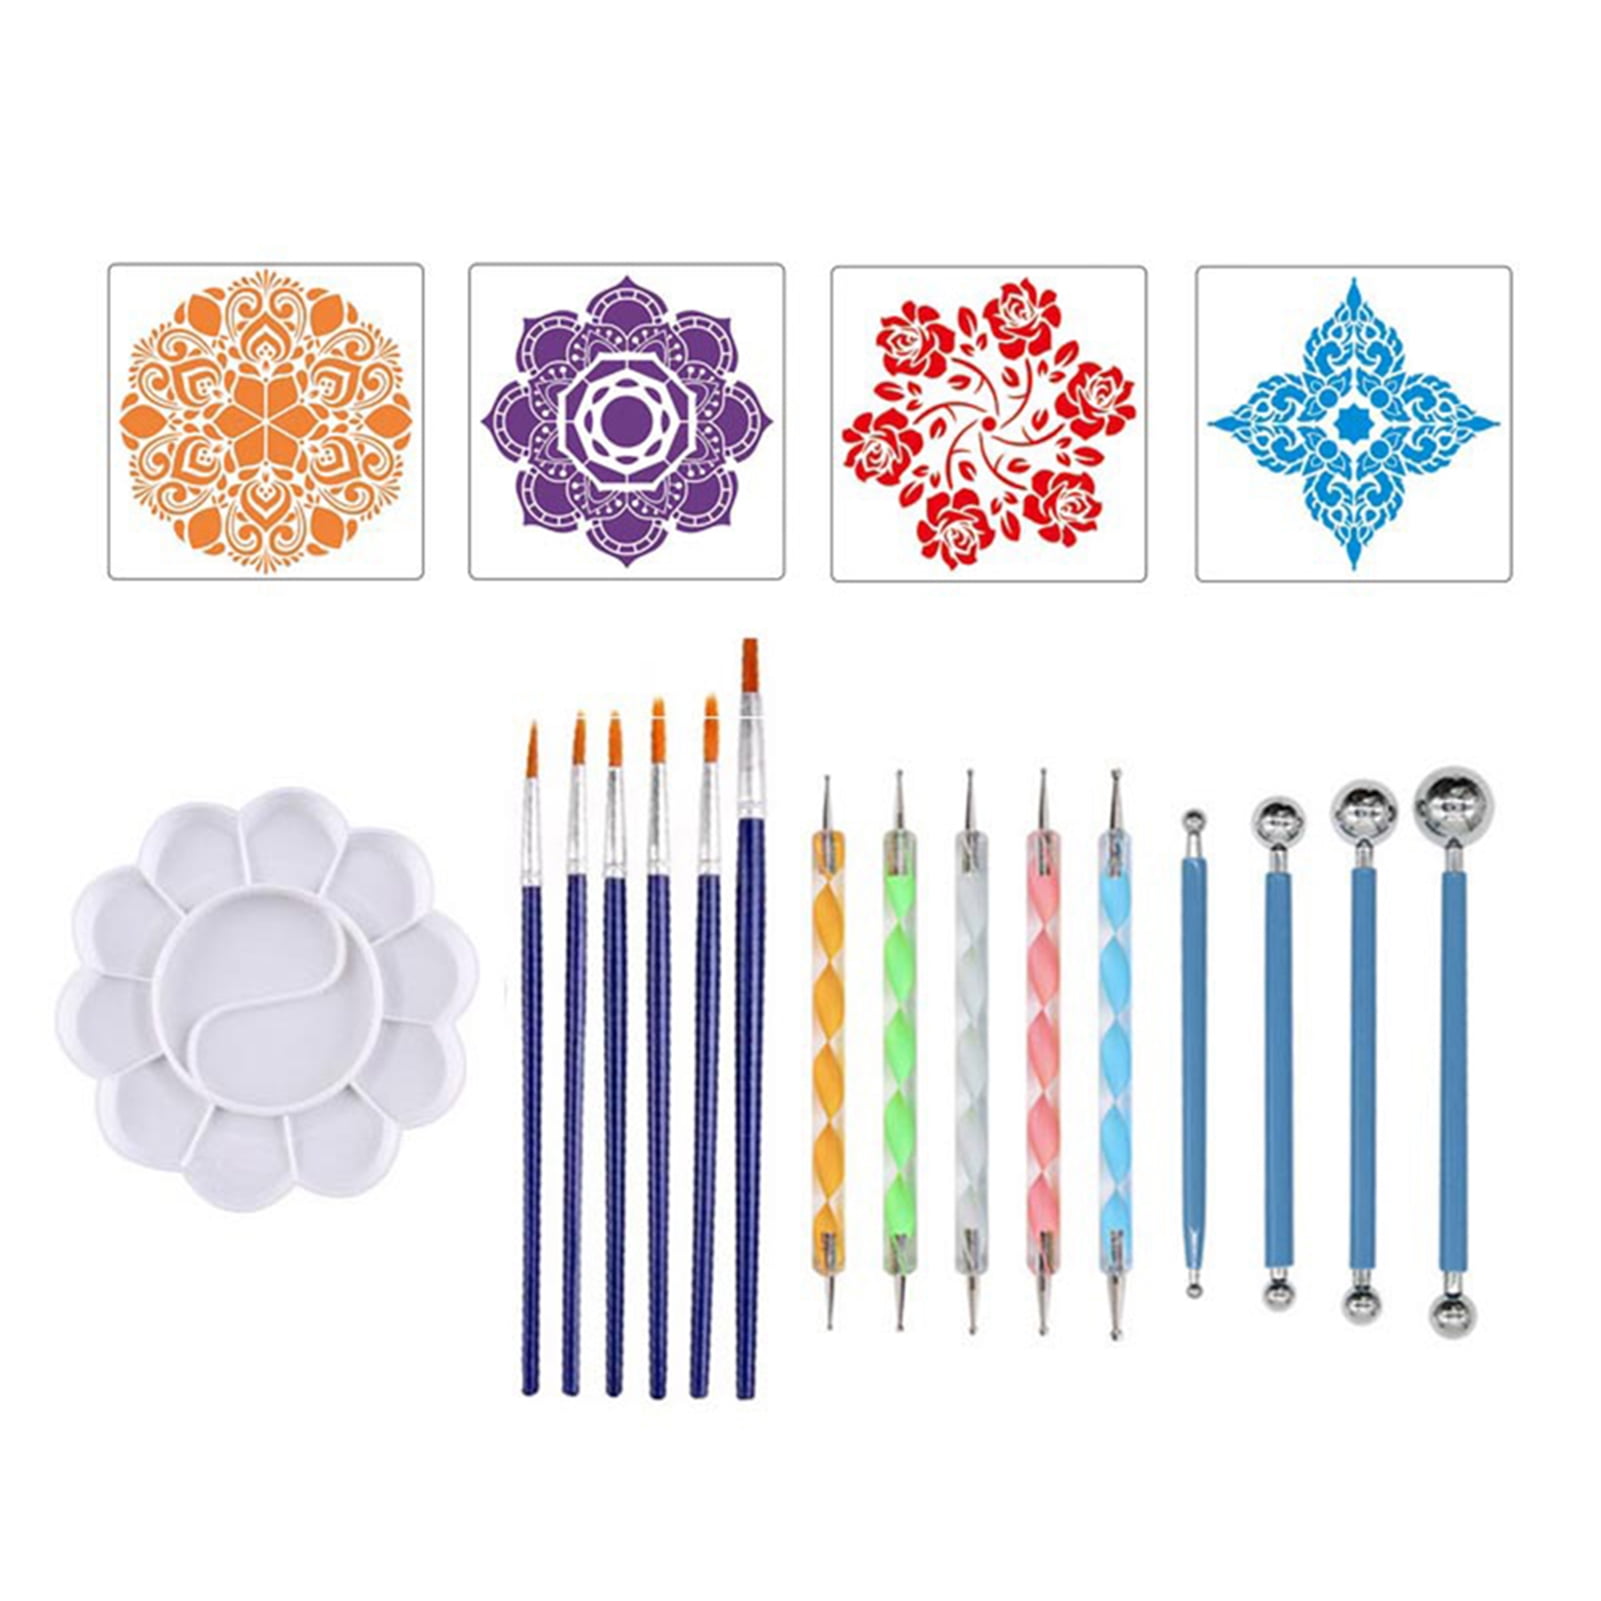 Dotting tools for mandala dot painting - overview - by Happy Dotting Company.  Ideal for all dot art 